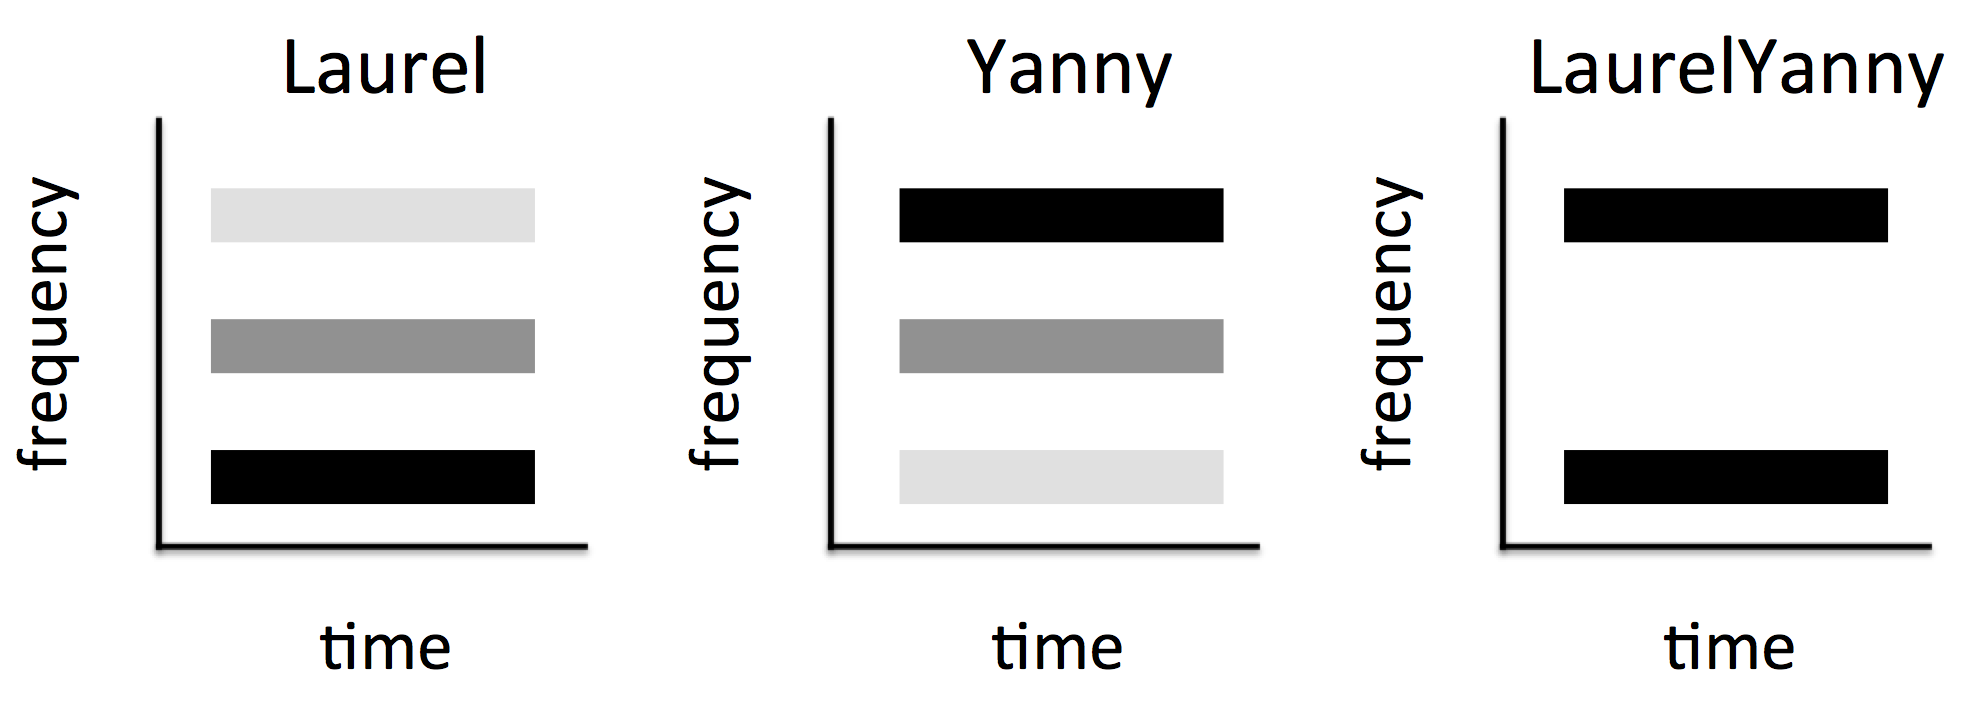 Stylized version of the Laurel and Yanny situation: Diagram of spectrograms. "Laurel" has all 3 formants, but with most power in the low frequencies. "Yanny" has all 3 formants, but with most power in the high frequencies. "LaurelYanny" has both high and low power, but nothing in the middle. So you have to guess.